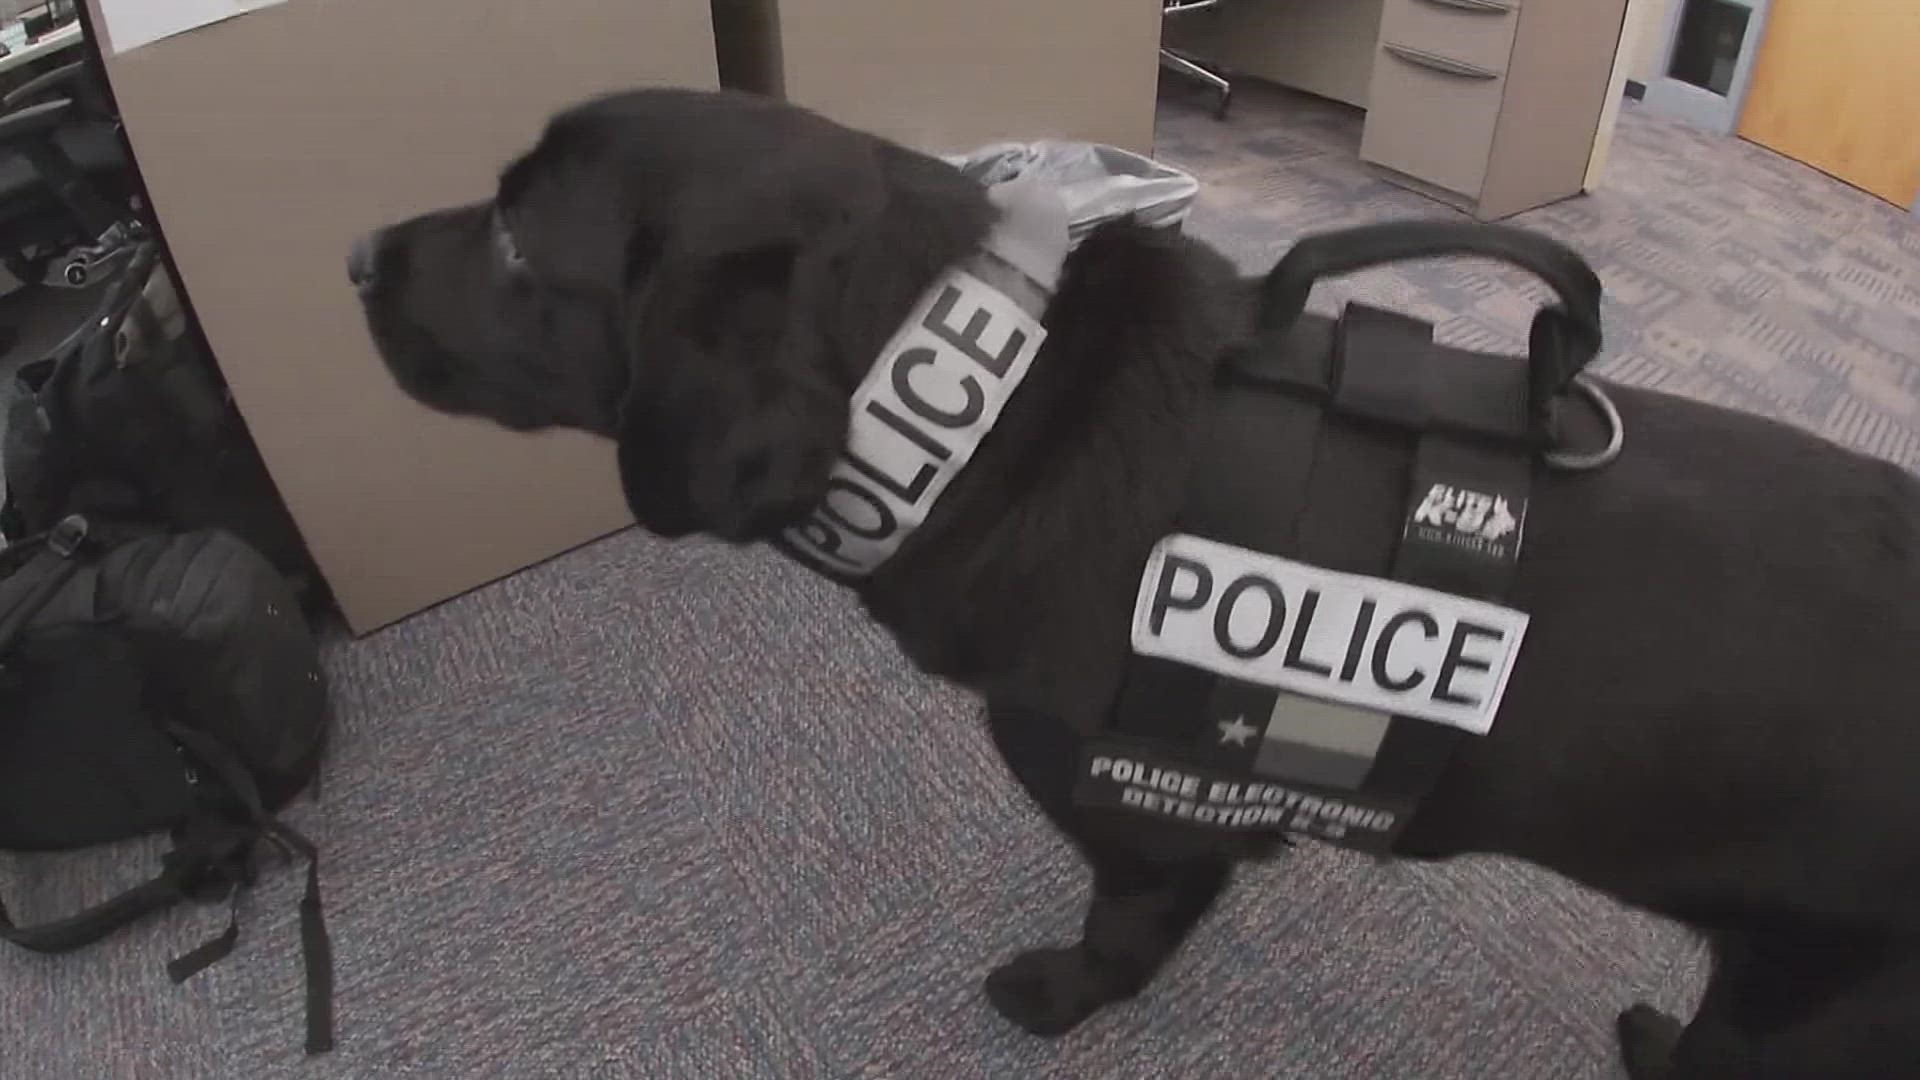 Dallas police: Meet new K-9 officer Remi | wfaa.com